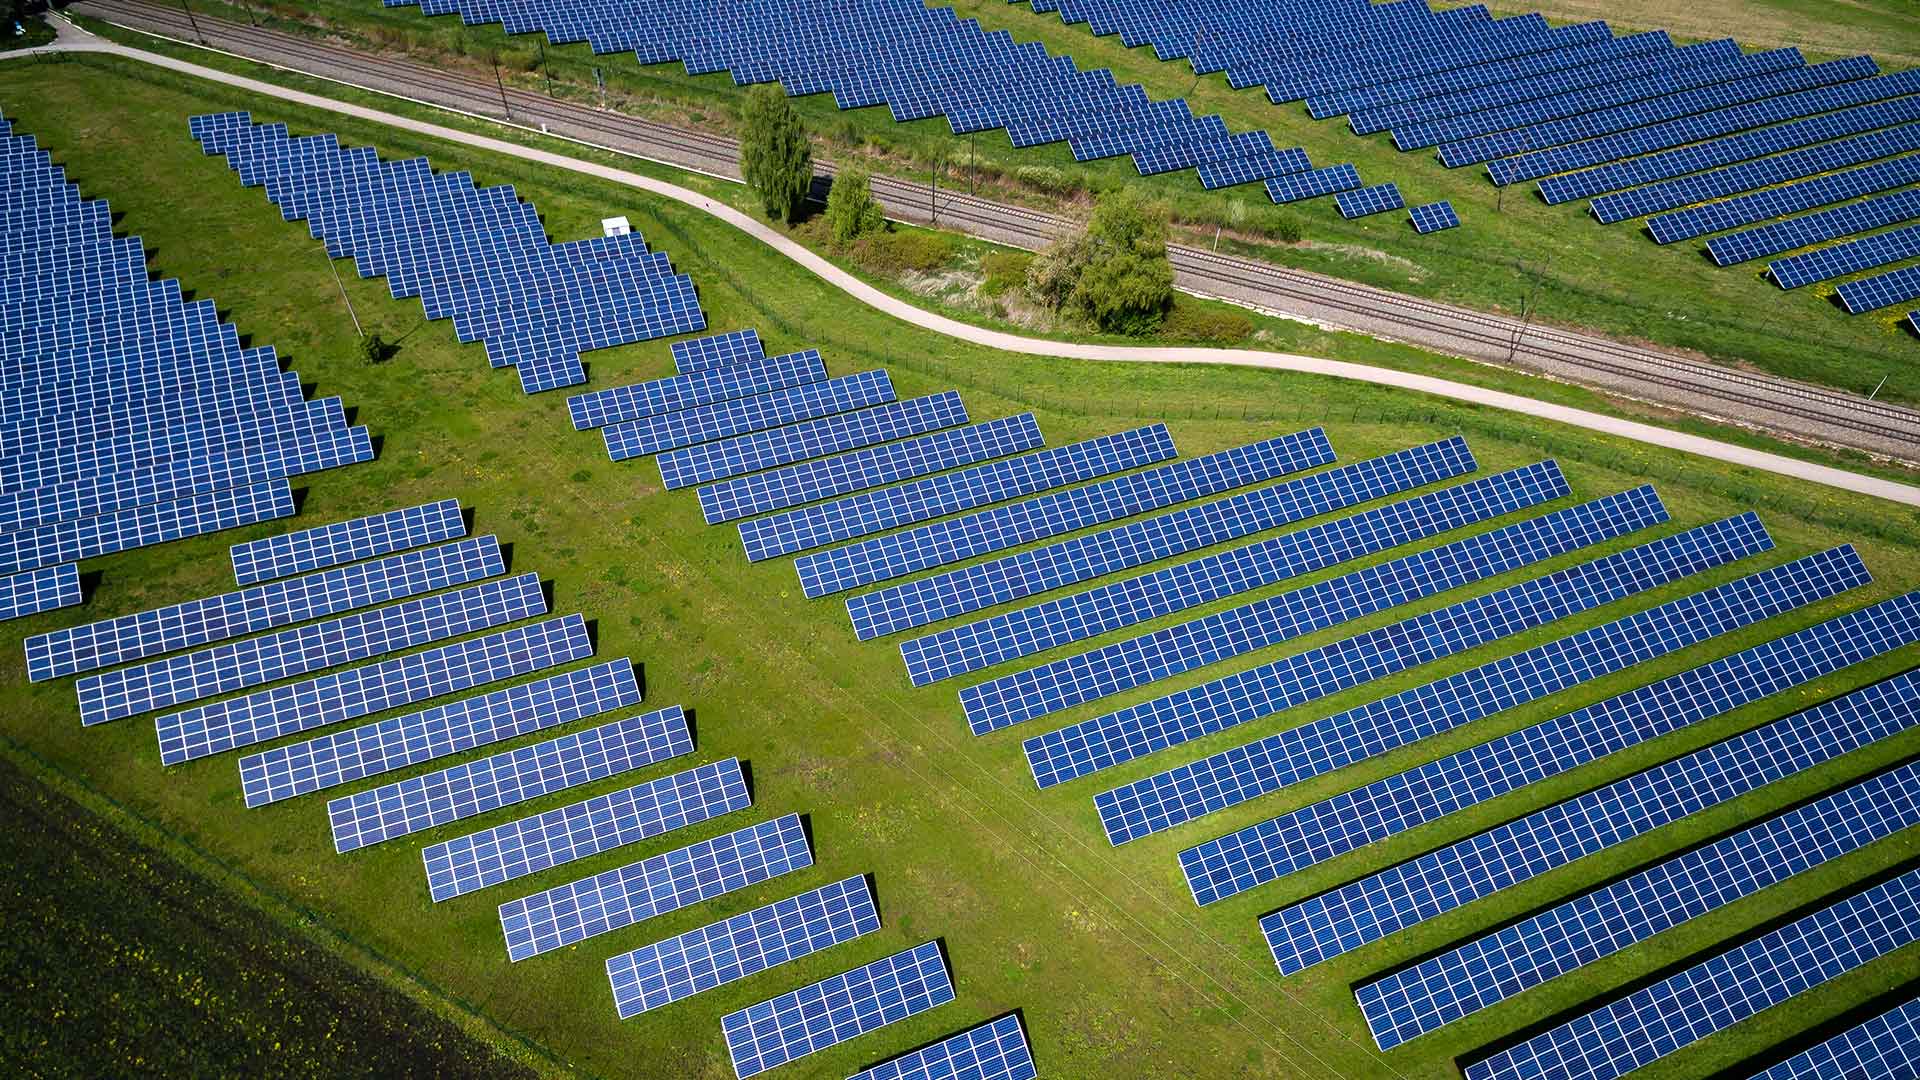 A solar farm in the age of renewable energy